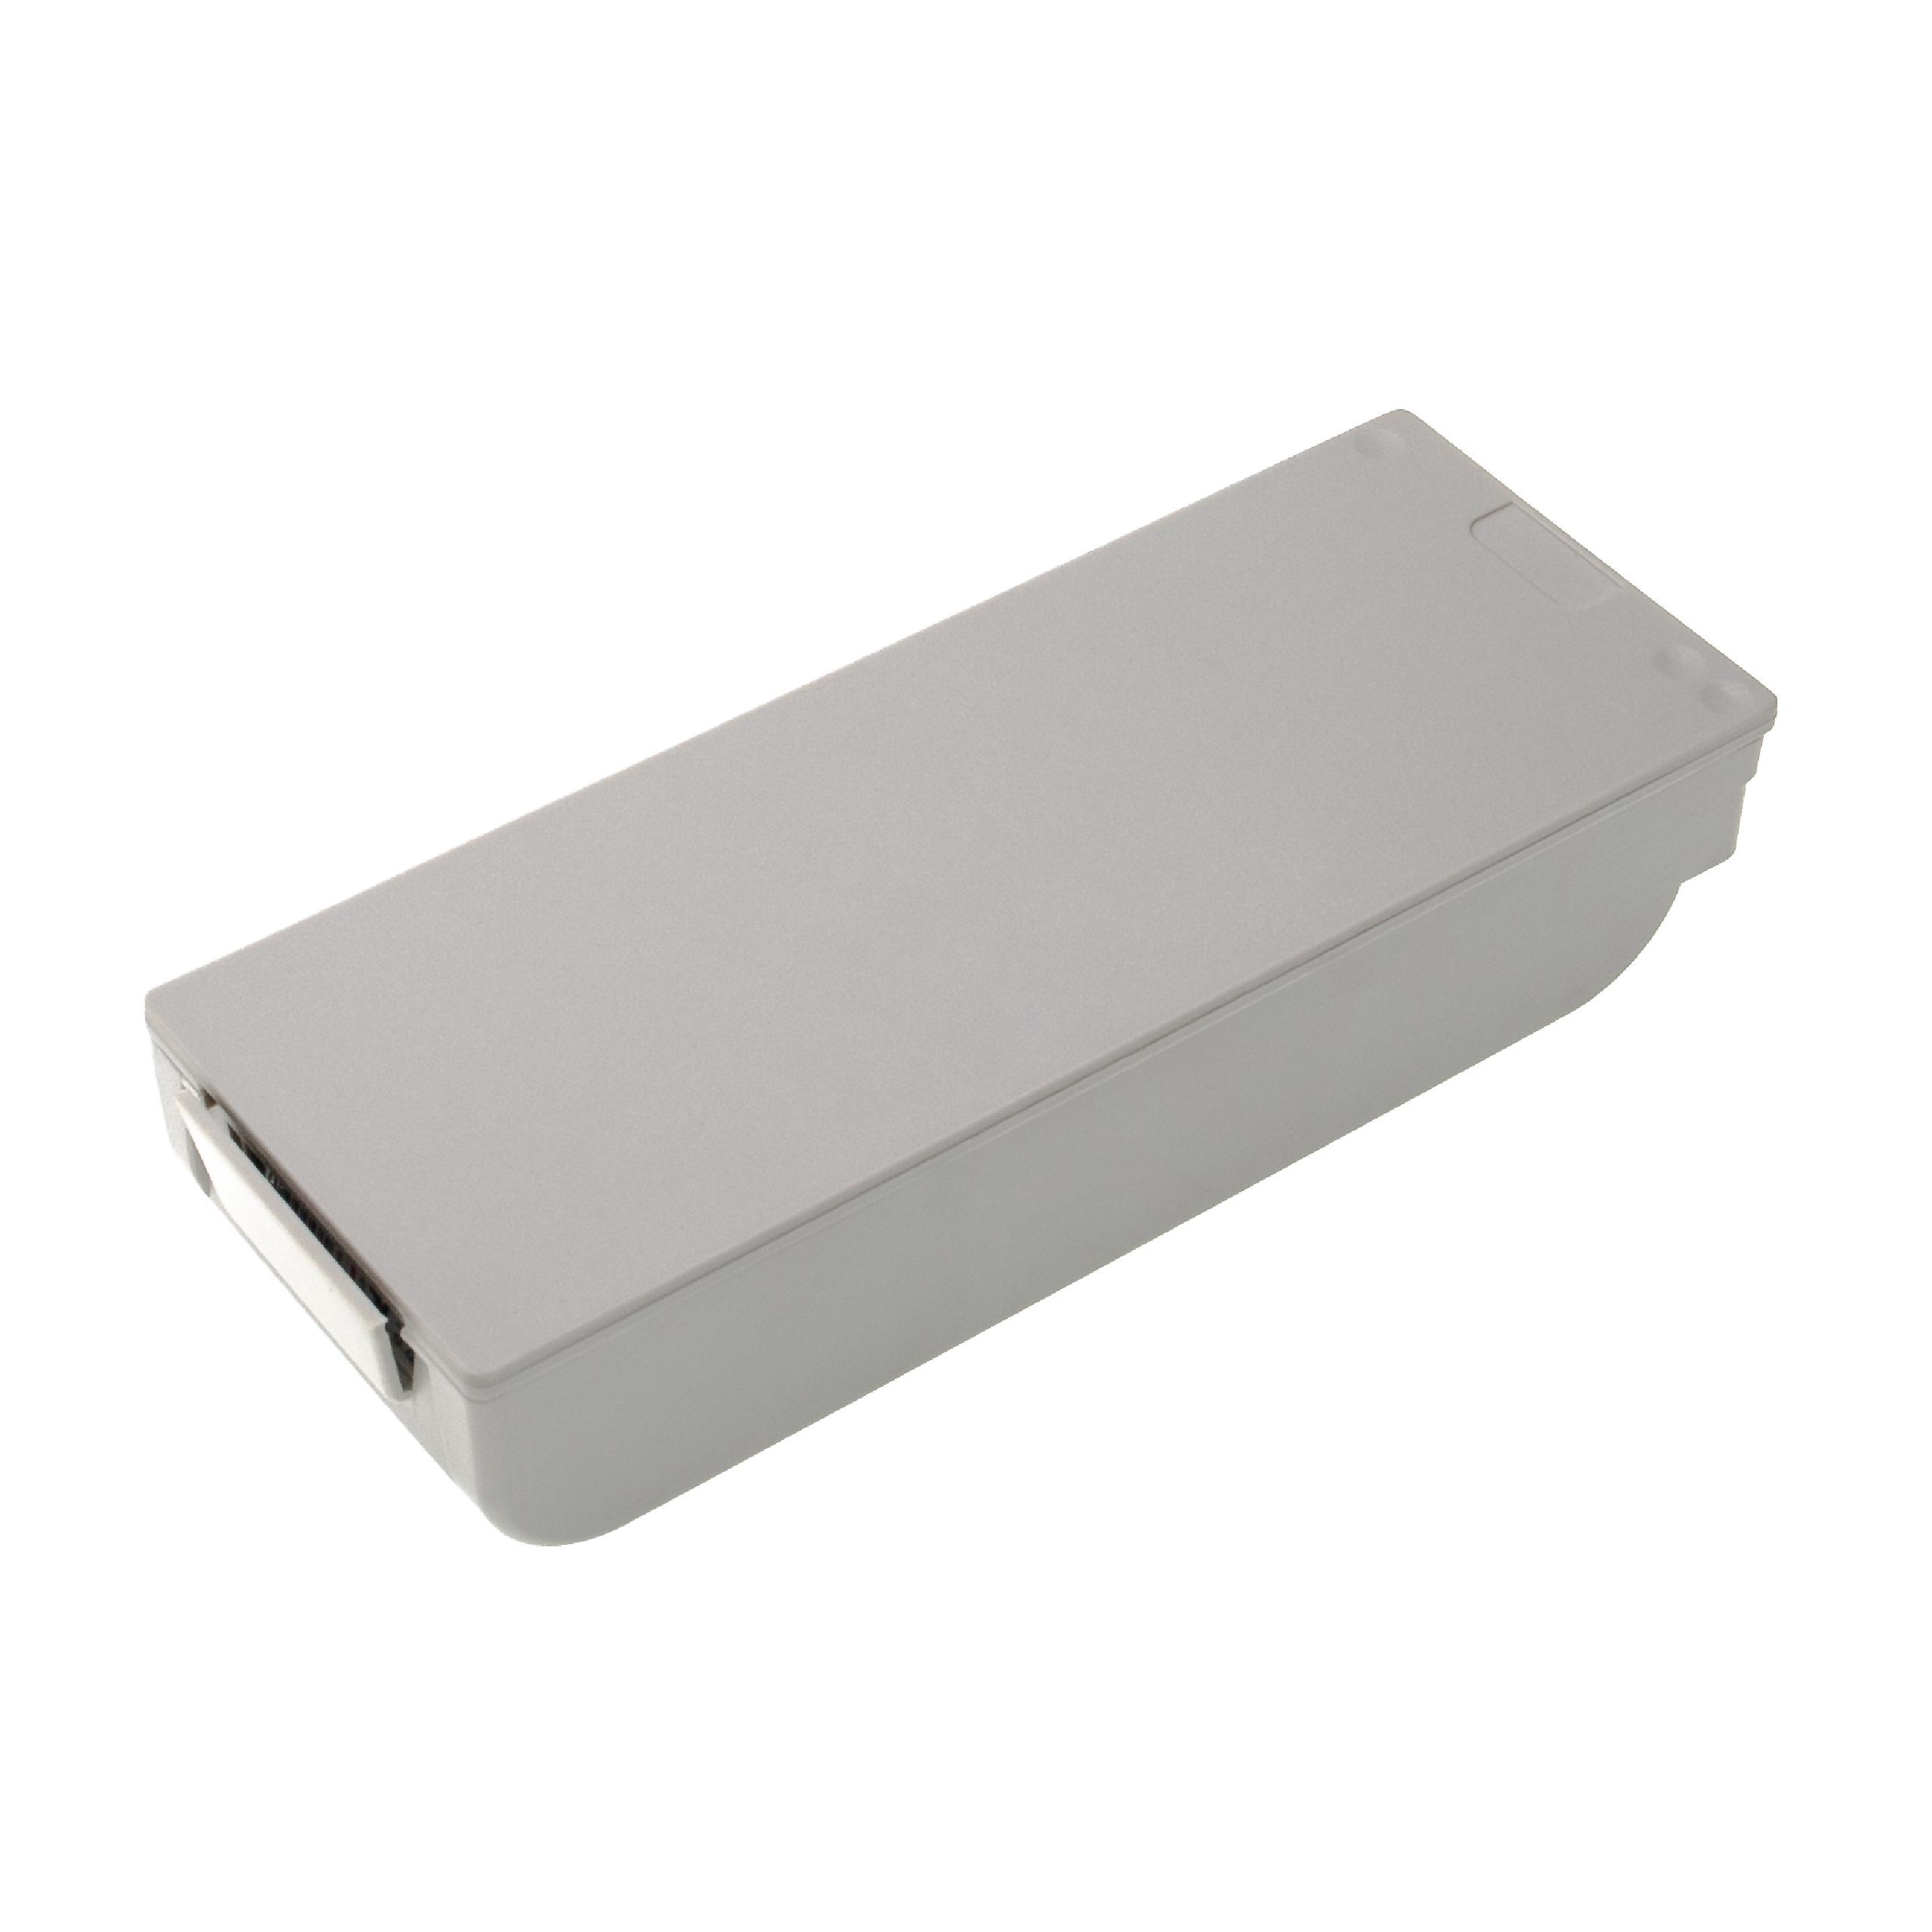 Medical Equipment Battery Replacement for ZOLL 8000-0299-01, B11099, 8000-0299-10, 110087 - 2500mAh 10V AGM